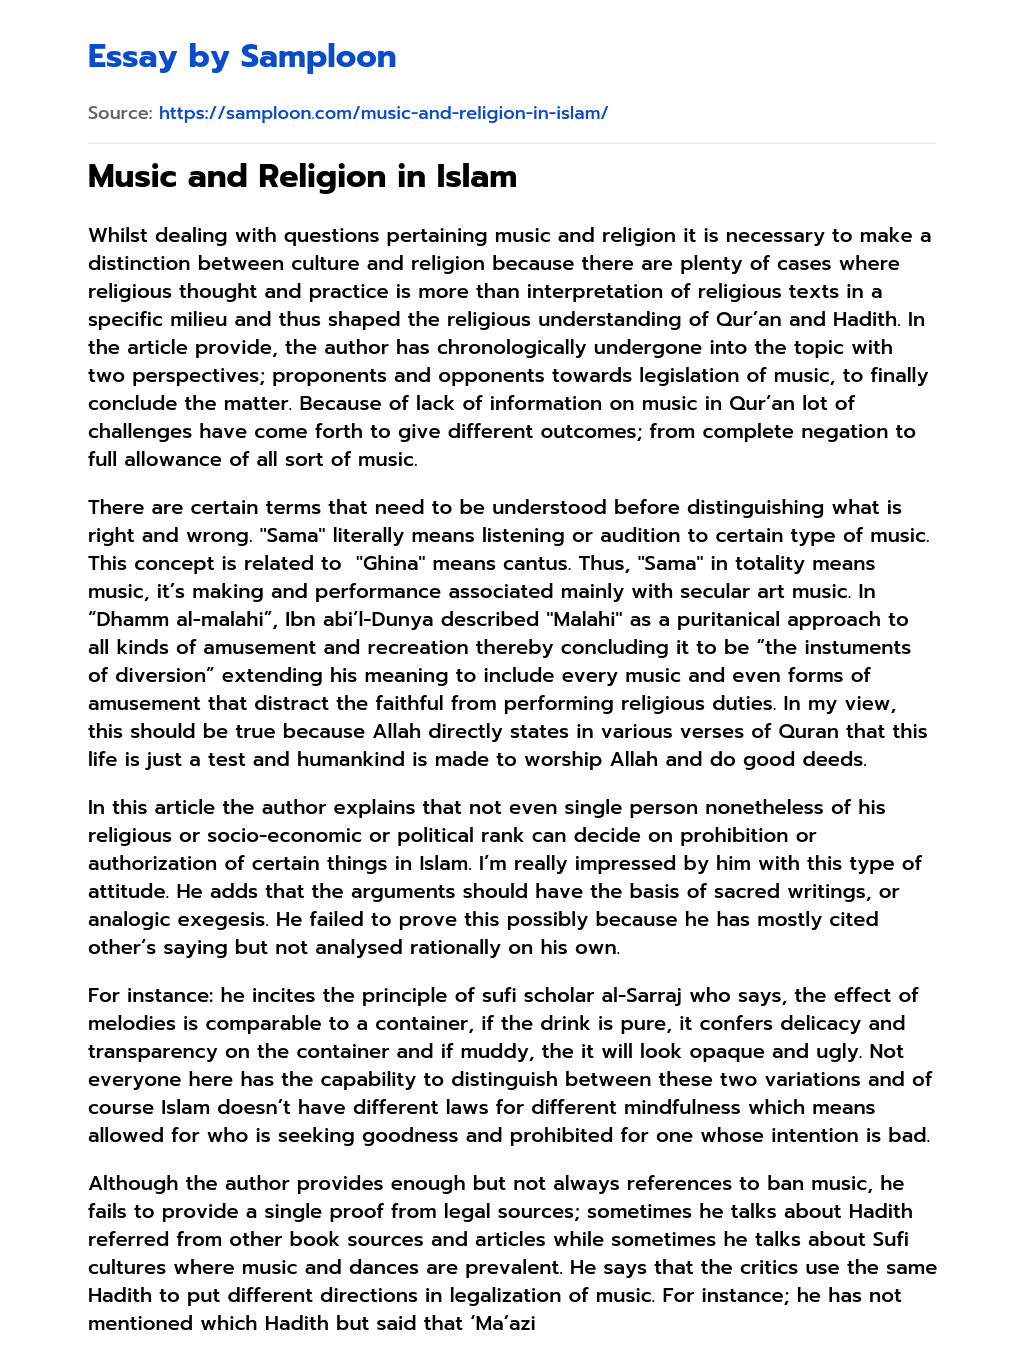 Music and Religion in Islam essay